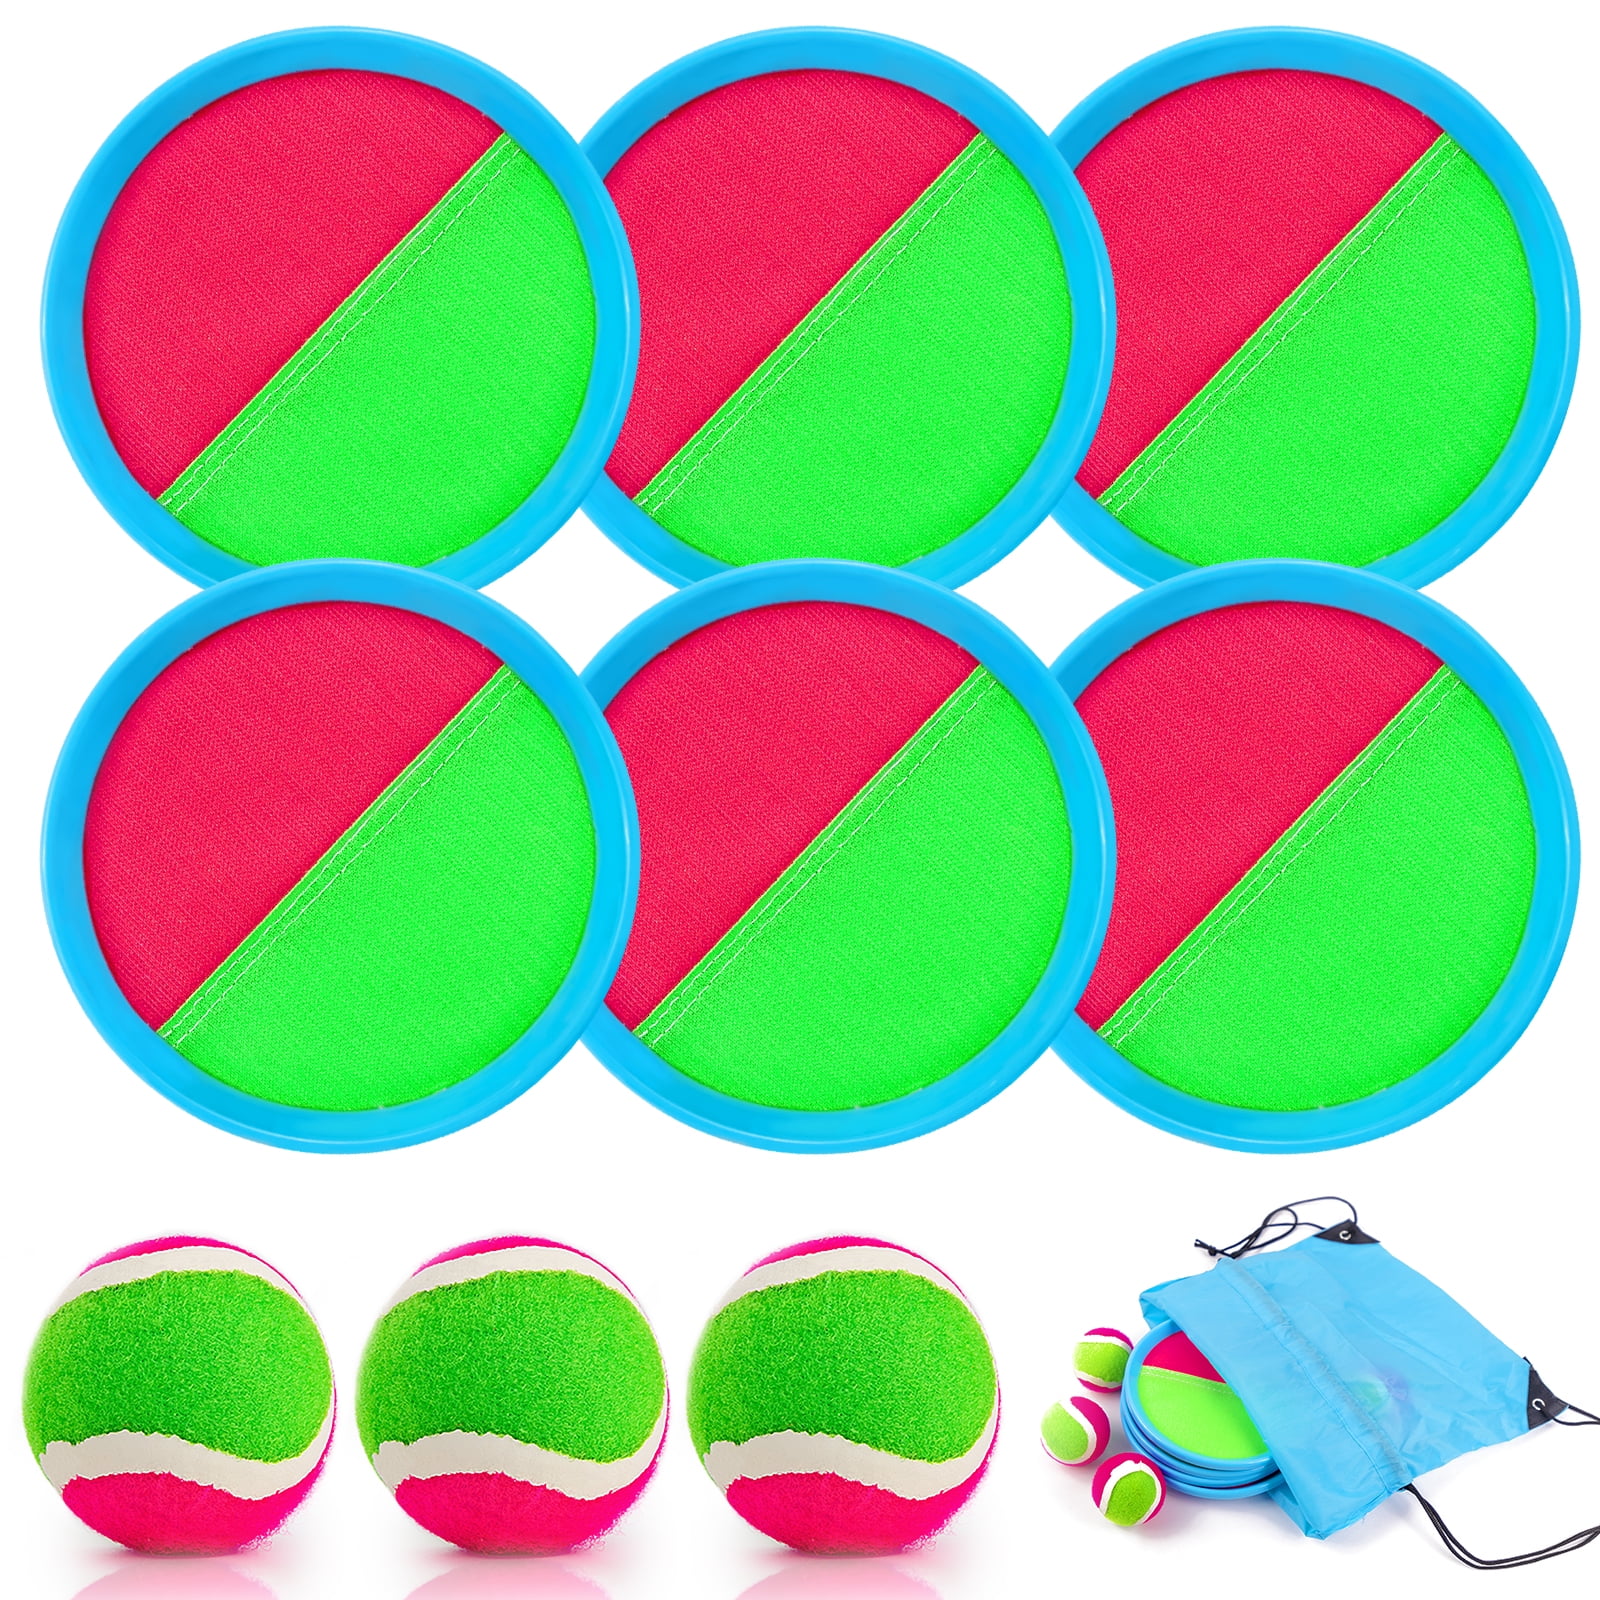  Roundnet Games Set Including 3 Balls Kit with Carrying Bag,  Roundnet Set Played Outdoor Indoor Beach Yard Lawn Backyard and Park, Outdoor  Games for Adults and Family Yellow : Toys 